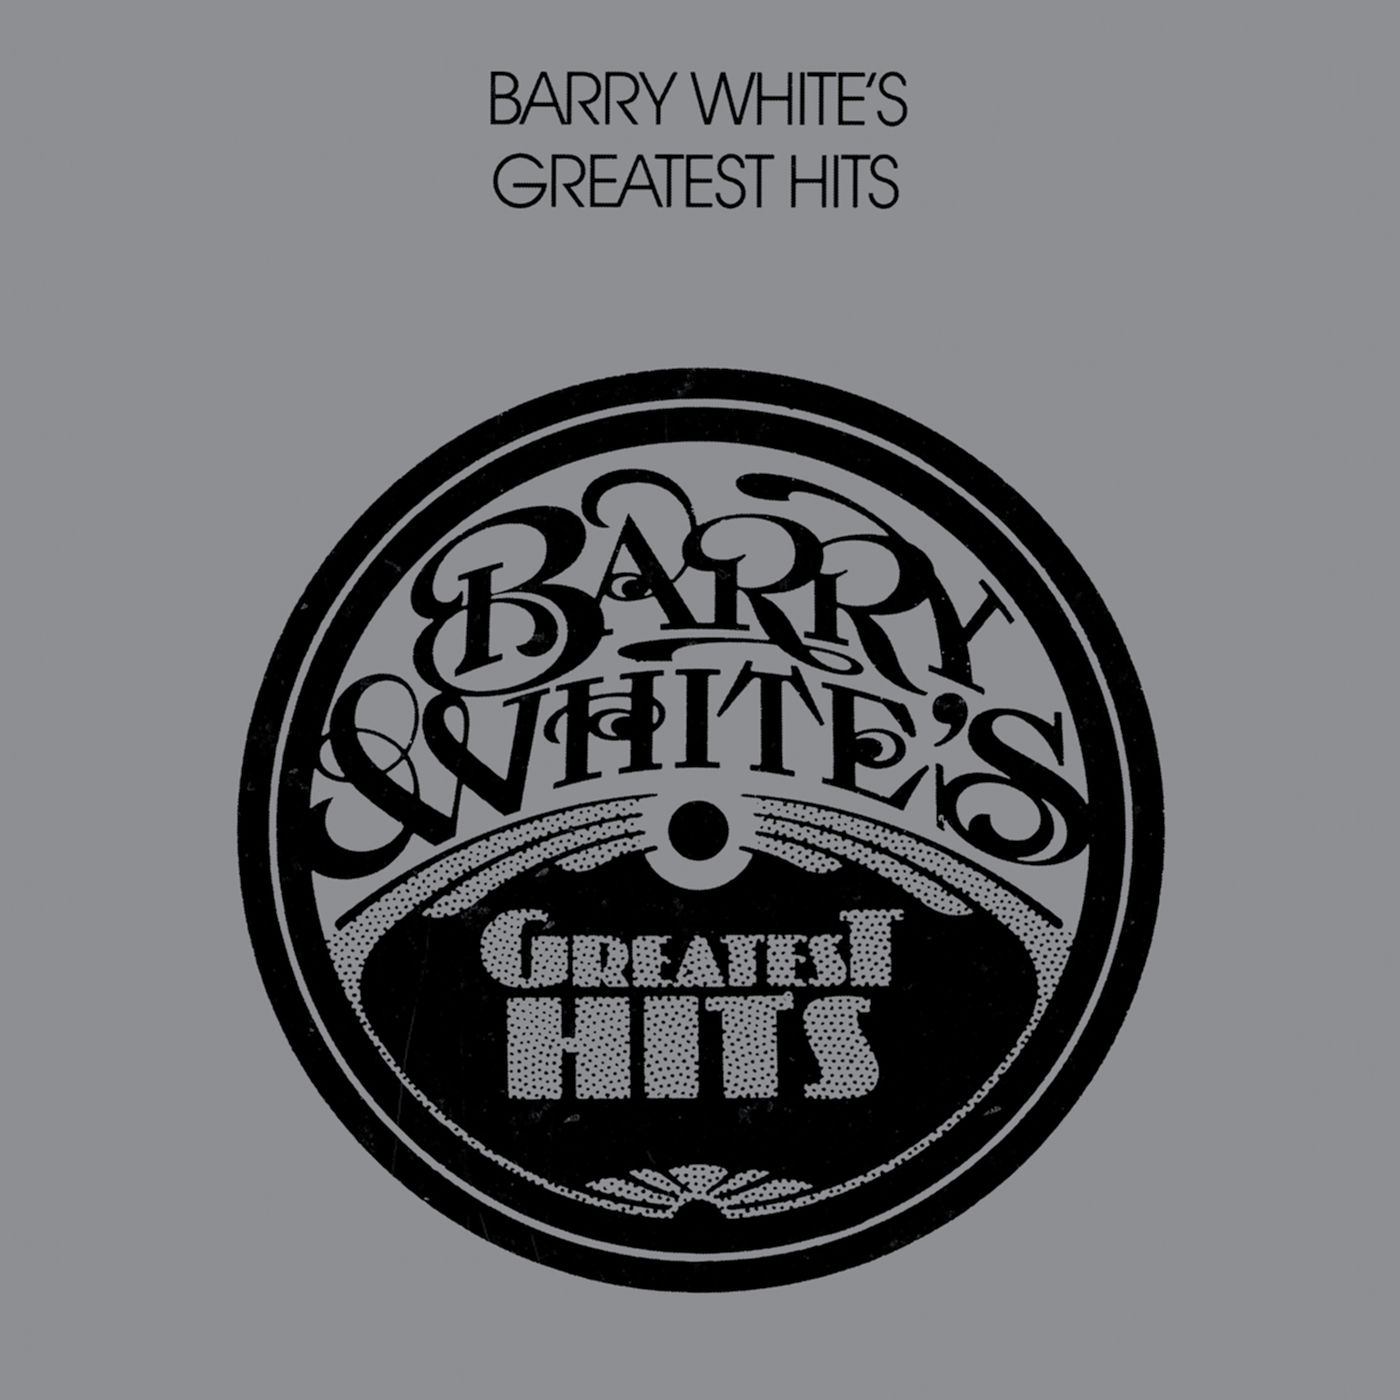 Barry White - Barry White’s Greatest Hits (1975/2021) [FLAC 24bit/96kHz]